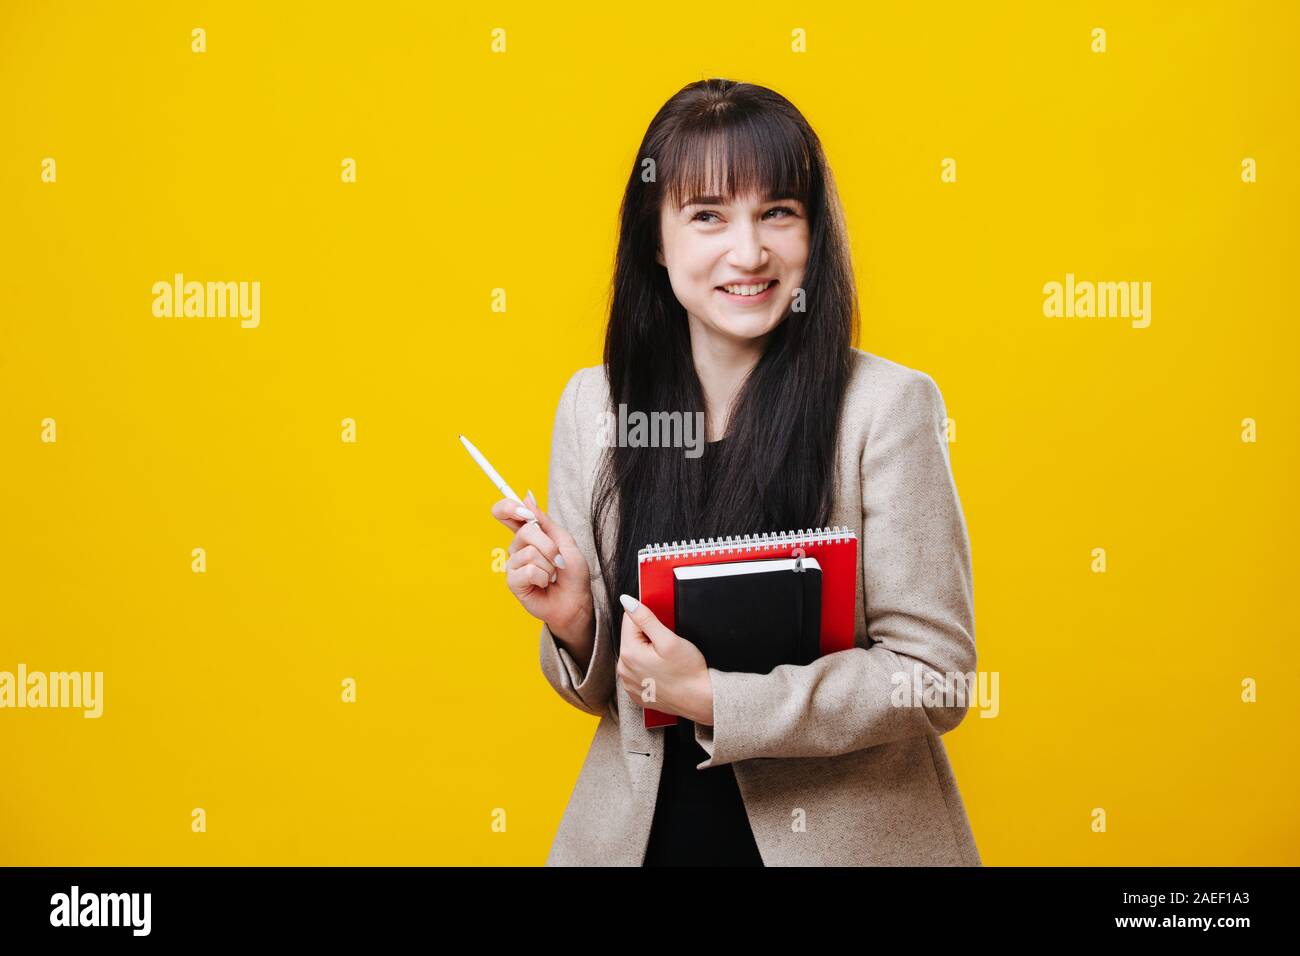 Smiling young business woman in a gray jacket holding pen over yellow Stock Photo